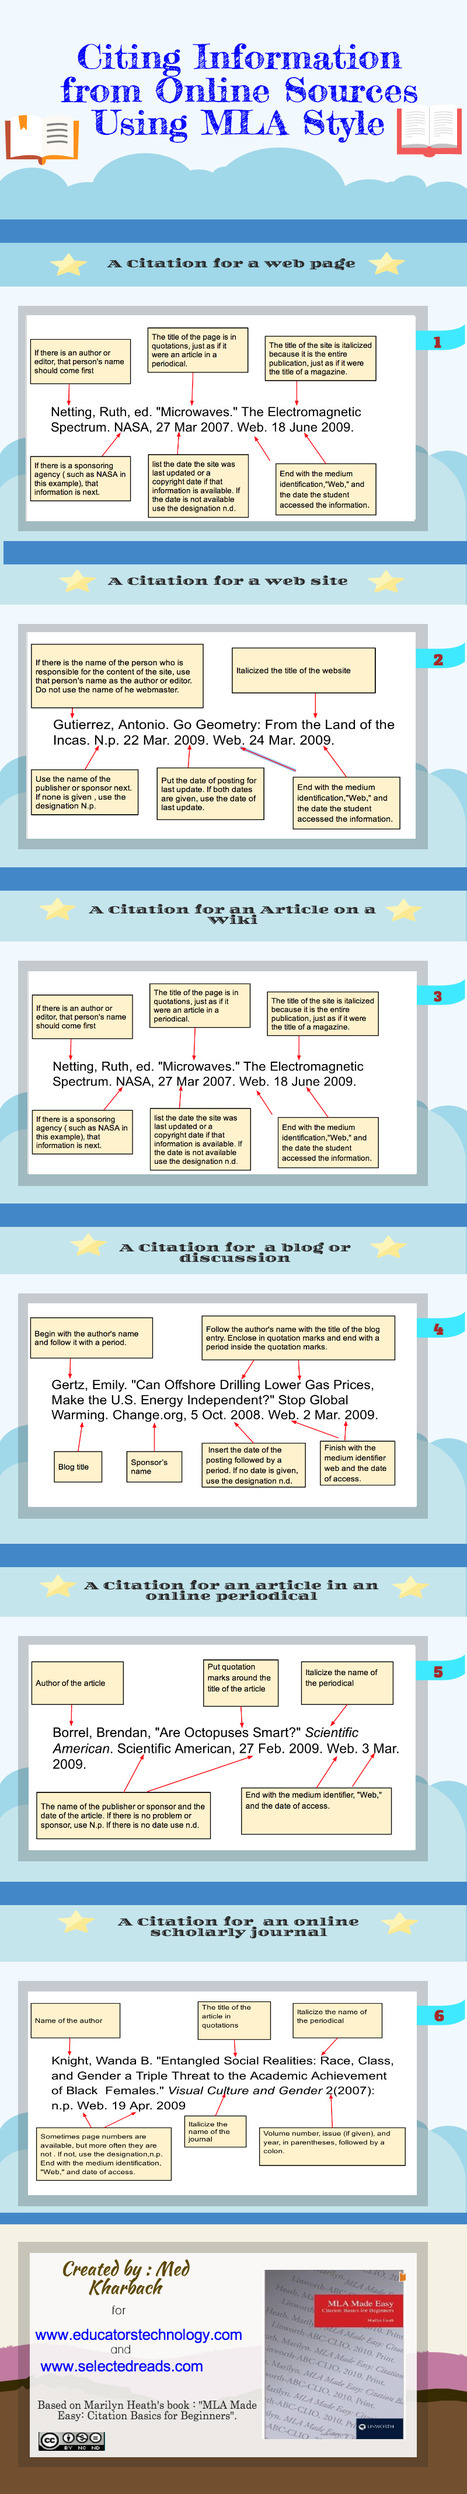 A Handy Visual on How to Cite Online Sources in MLA Style via Educators Technology | iGeneration - 21st Century Education (Pedagogy & Digital Innovation) | Scoop.it